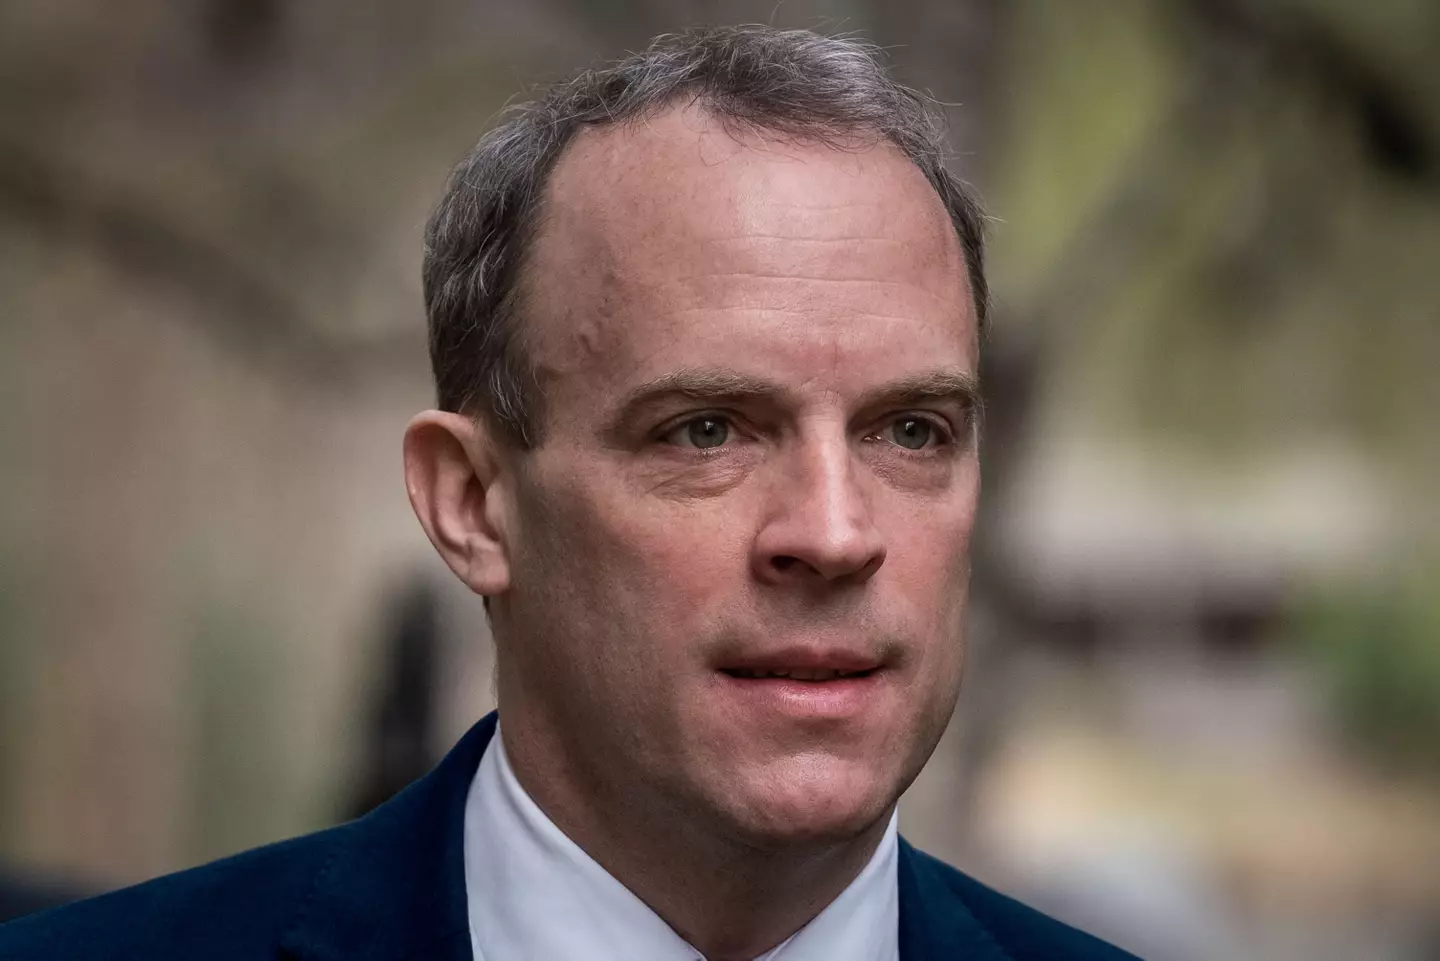 Dominic Raab is now serving as Prime Minister.